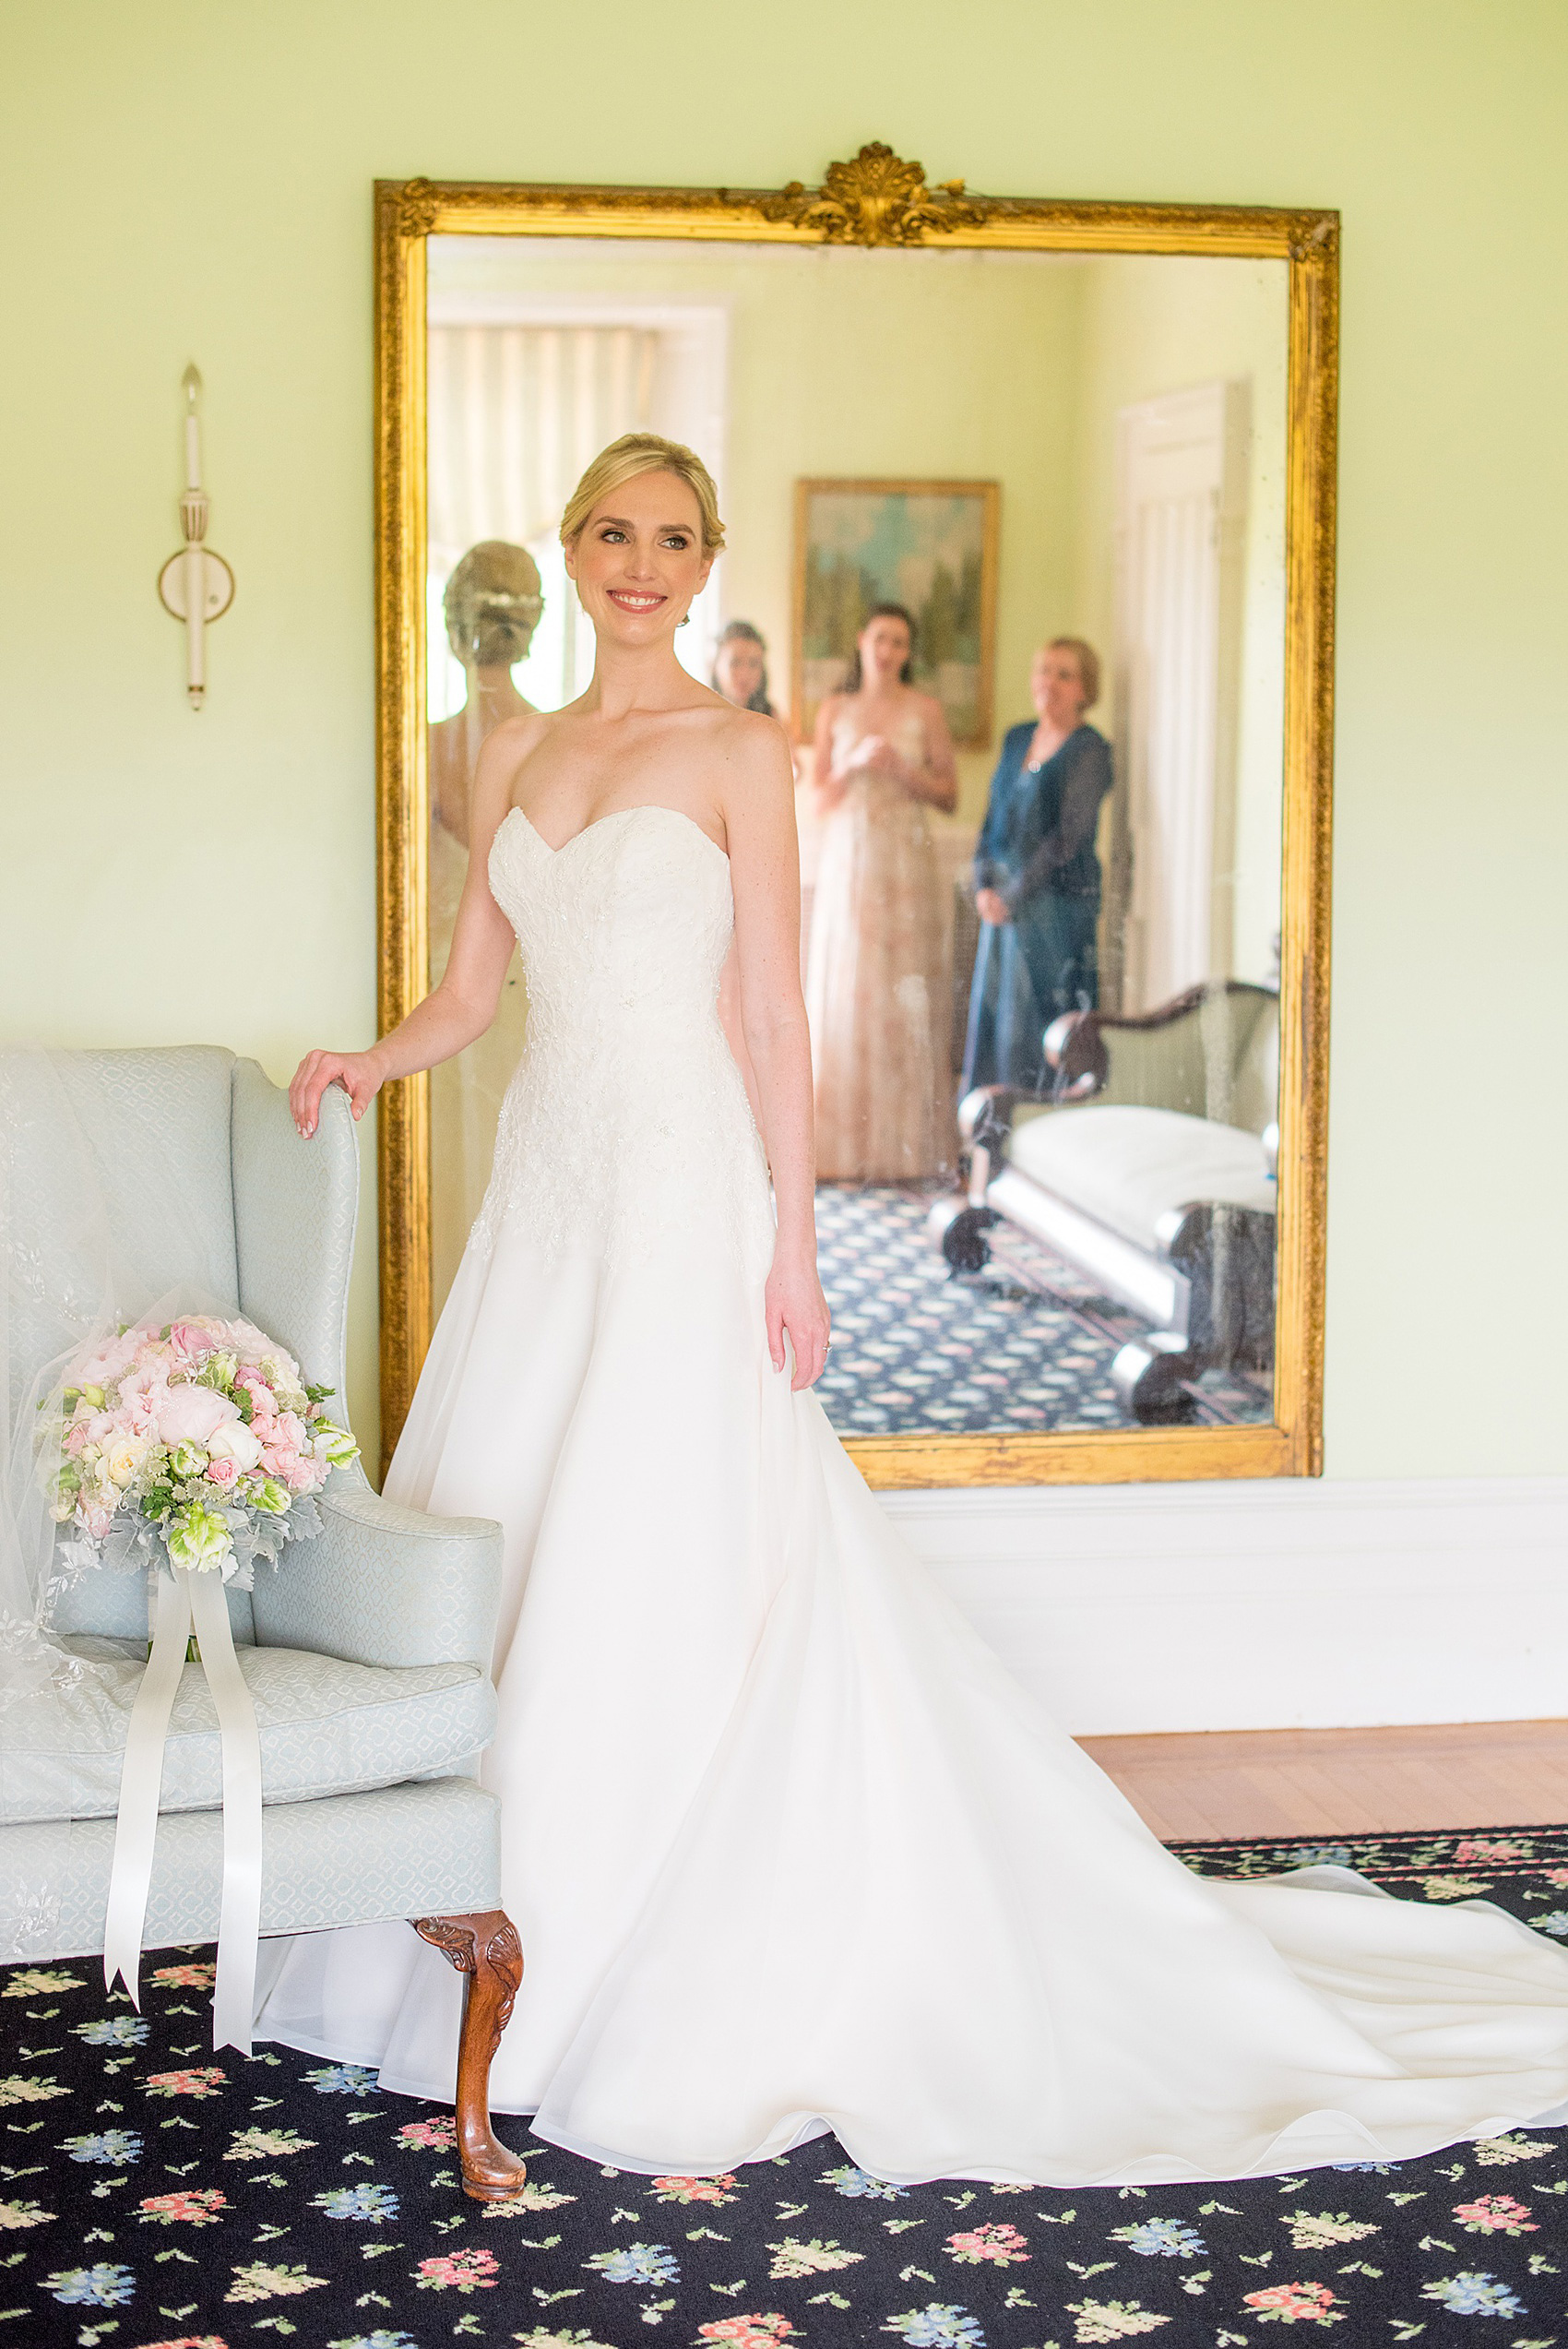 Waveny House wedding photos in Connecticut by Mikkel Paige Photography. Picture of the bride with her family looking on in the mirror.